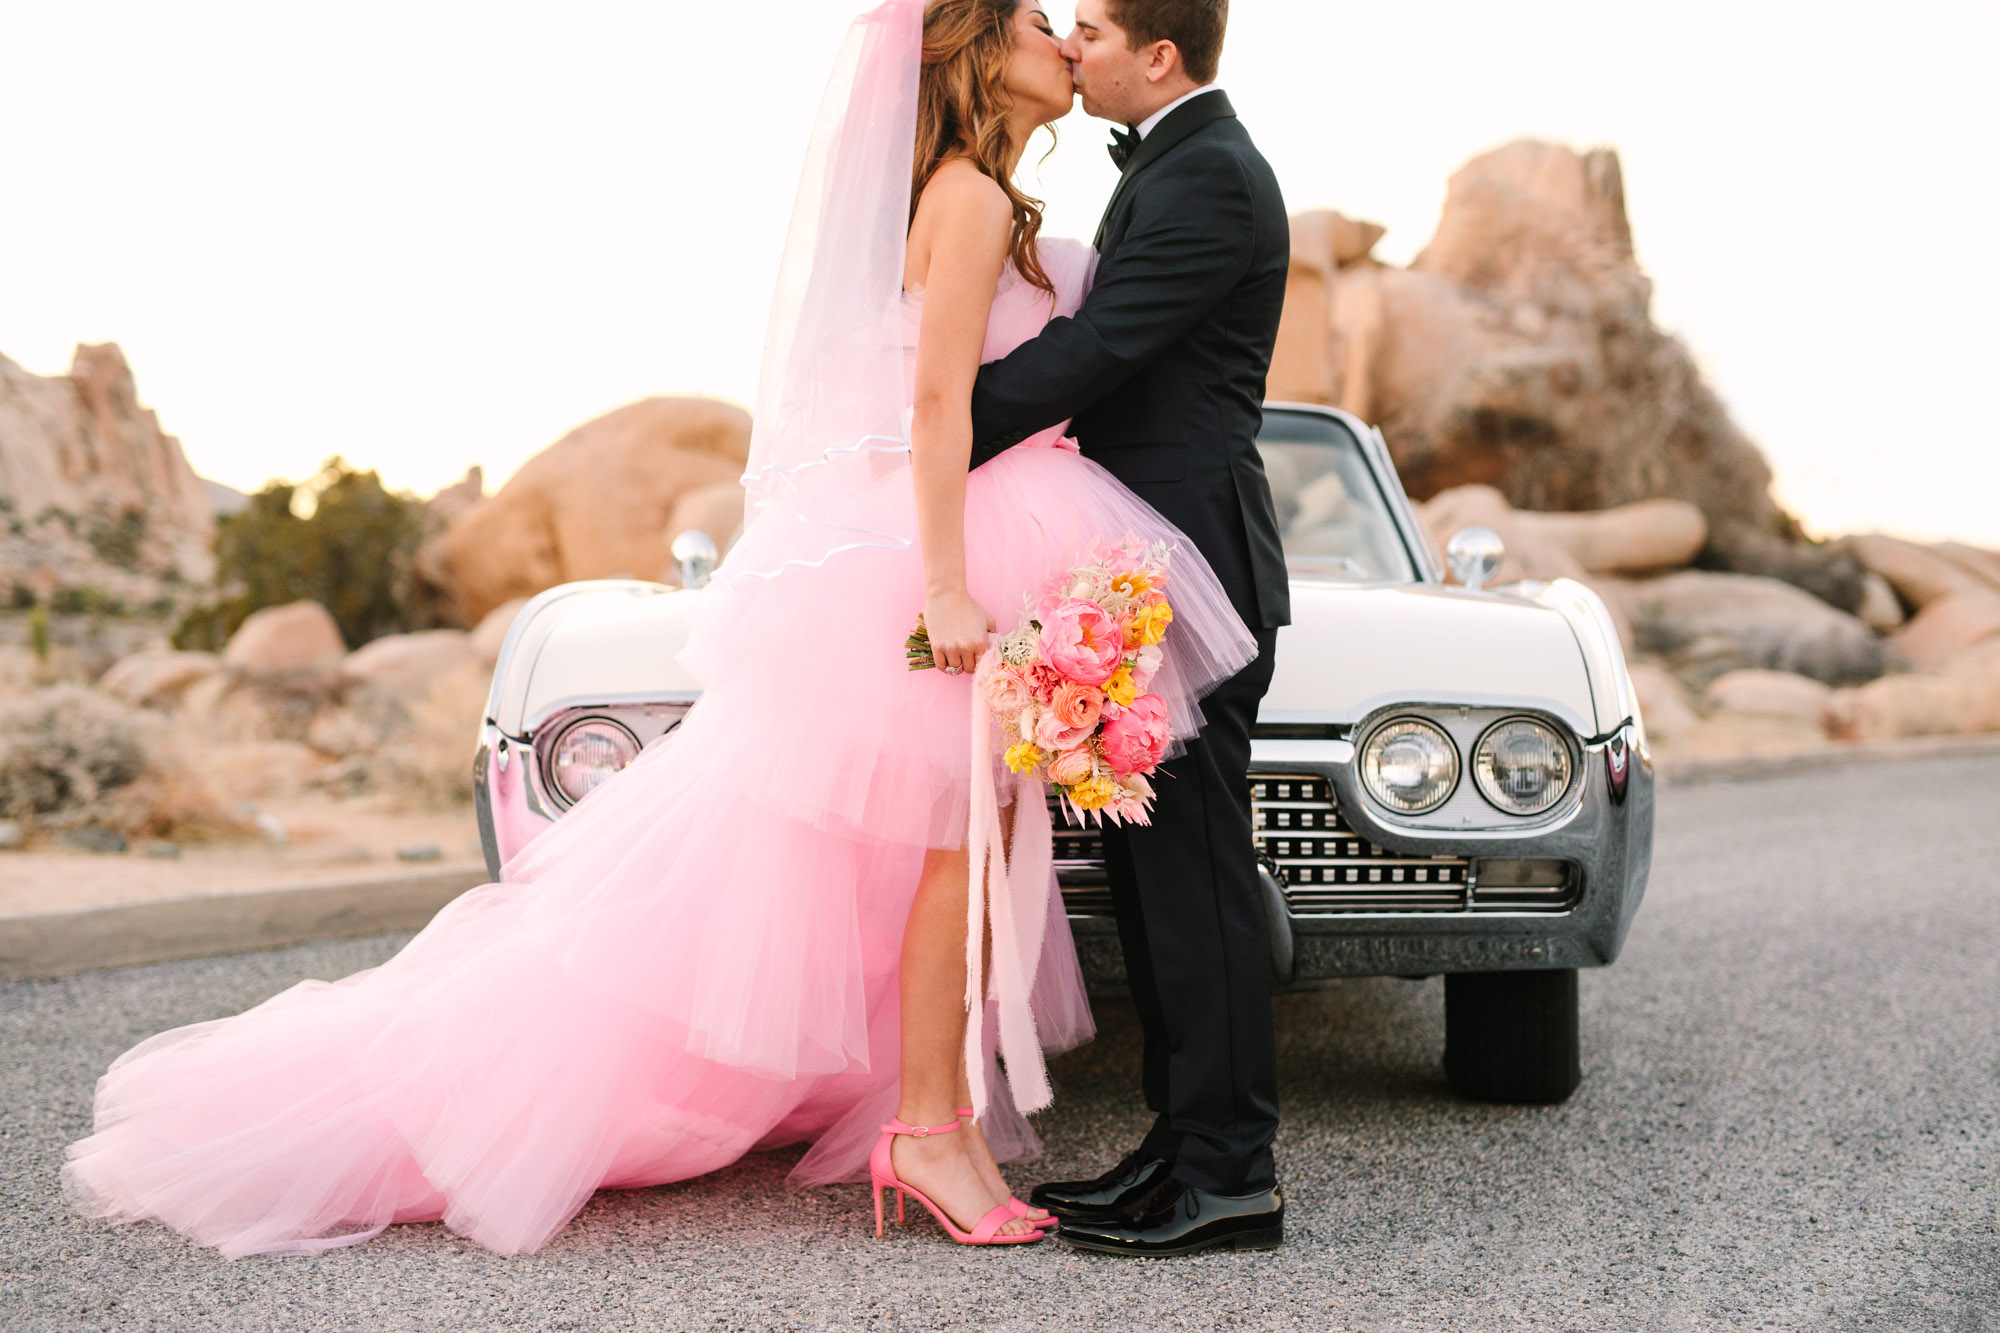 Bride and groom in front of white classic convertible car | Pink wedding dress Joshua Tree elopement featured on Green Wedding Shoes | Colorful desert wedding inspiration for fun-loving couples in Southern California #joshuatreewedding #joshuatreeelopement #pinkwedding #greenweddingshoes Source: Mary Costa Photography | Los Angeles